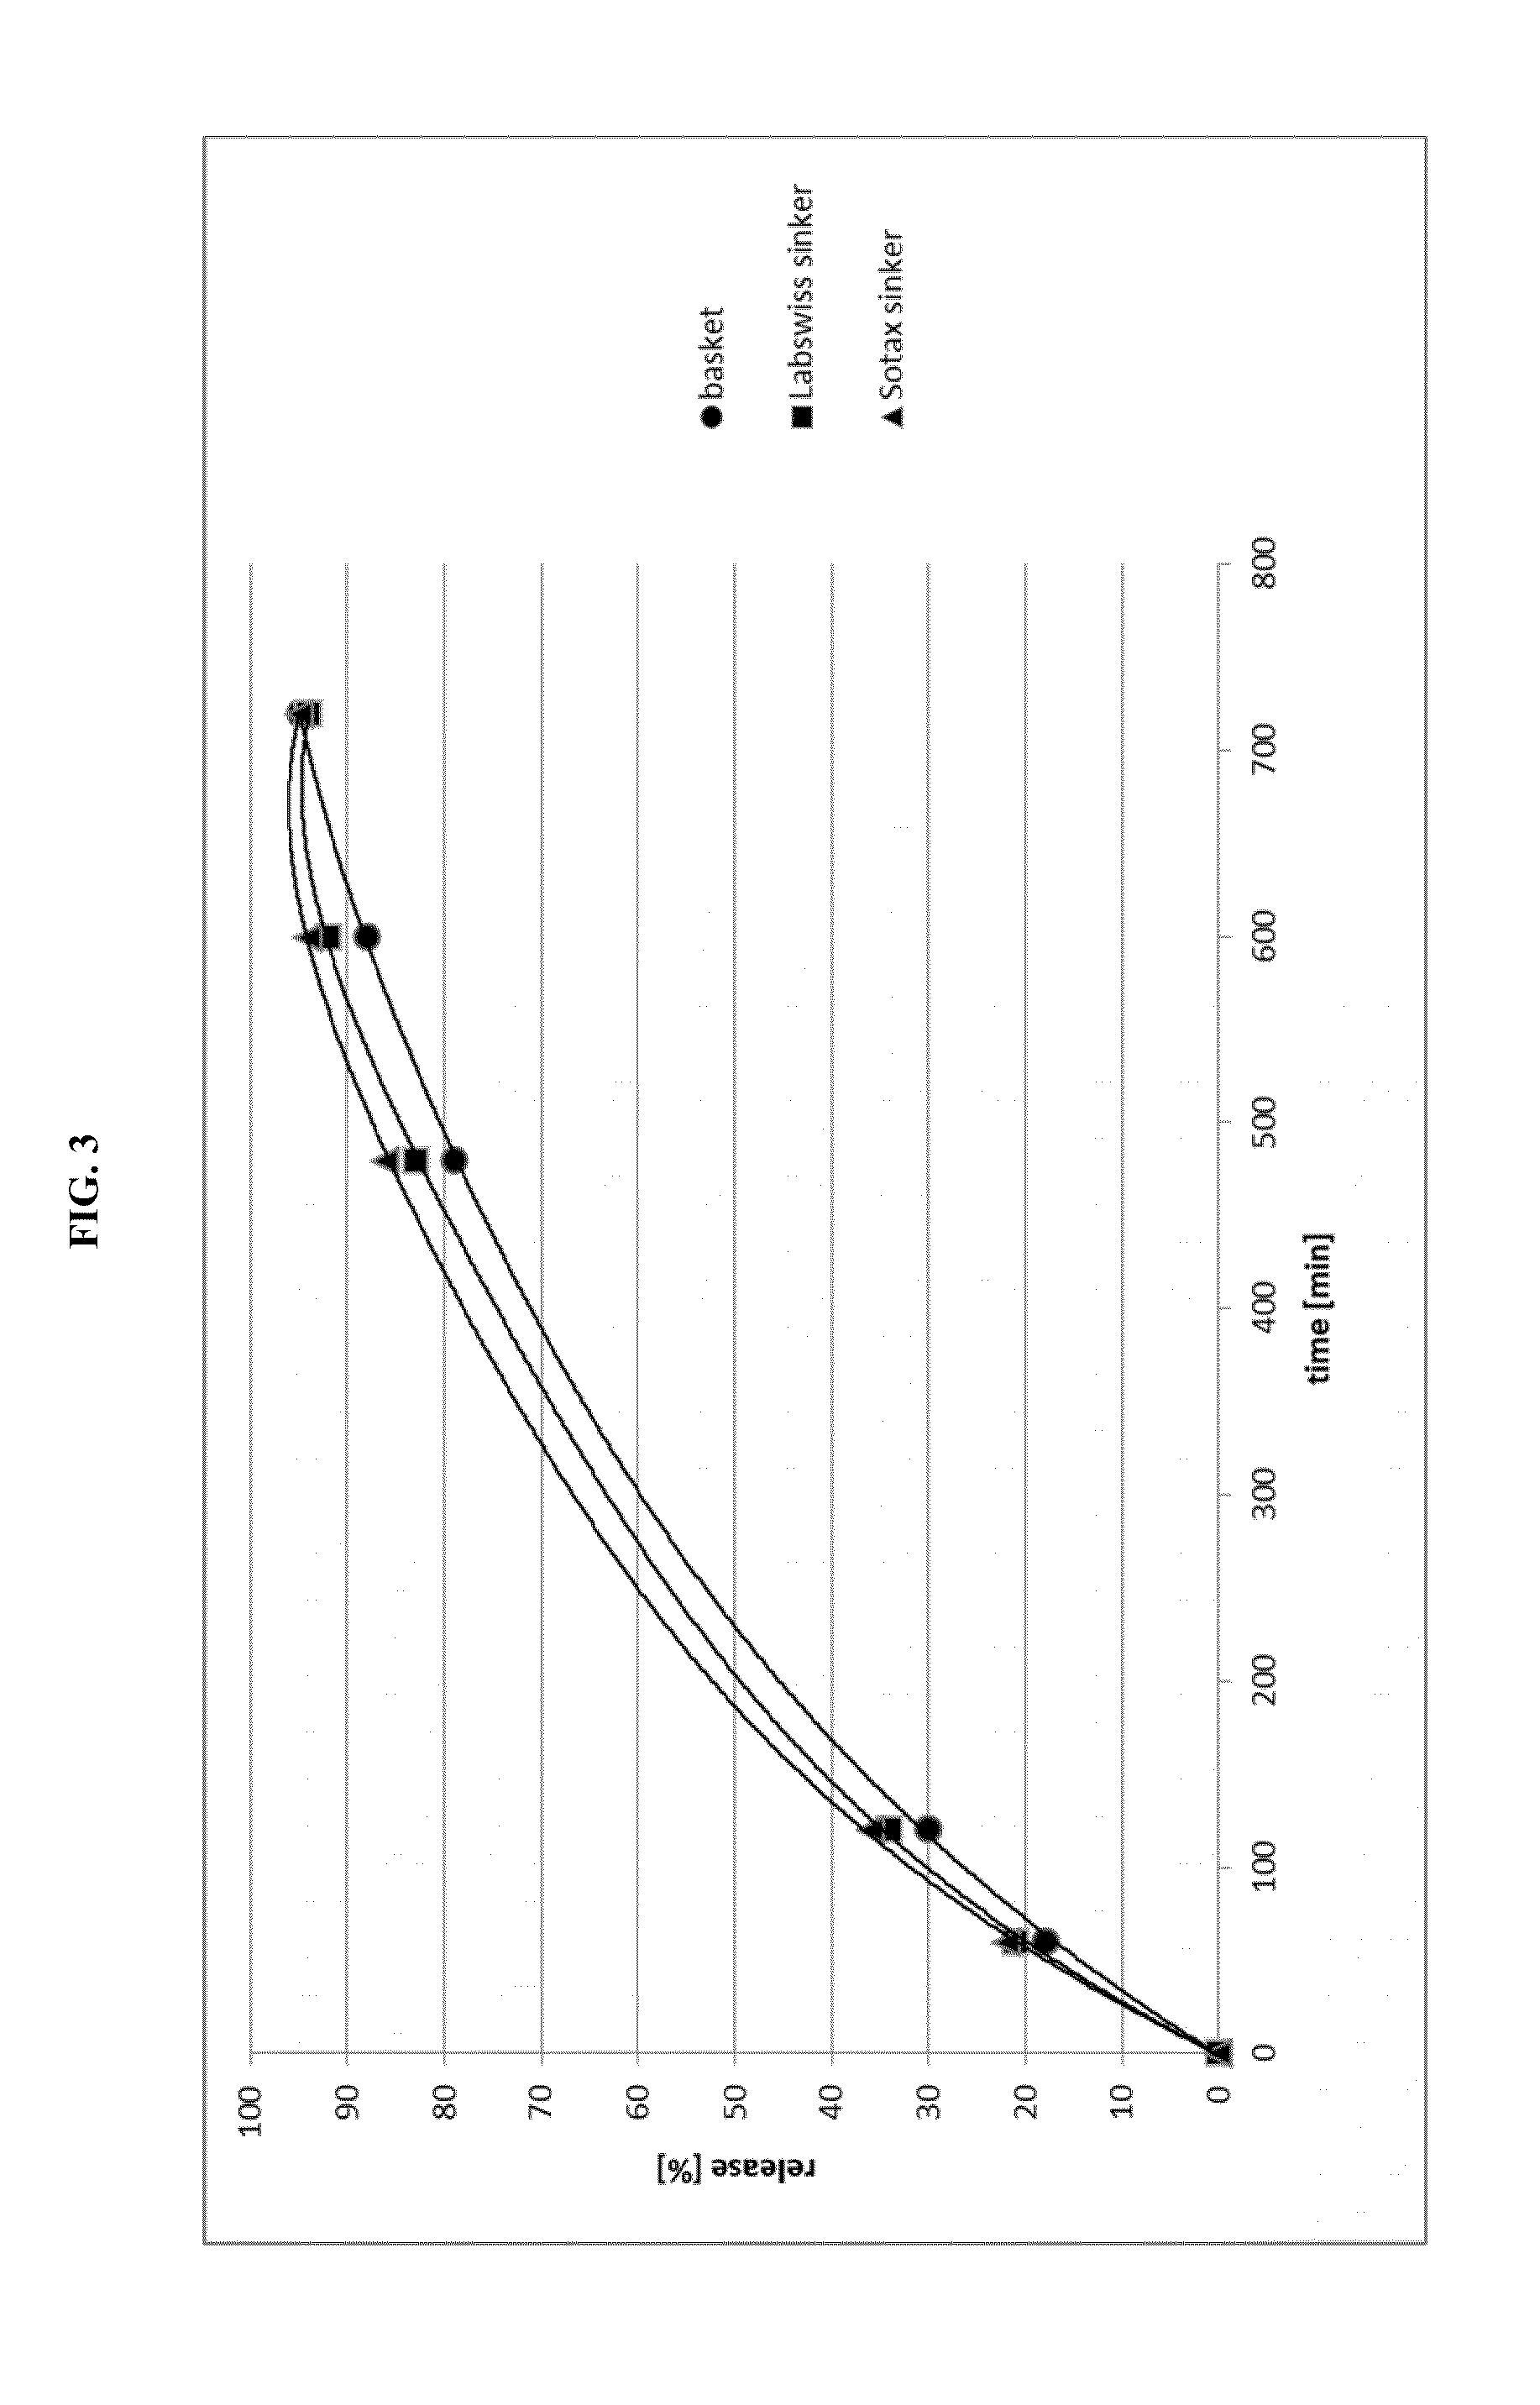 Tamper-resistant dosage form containing one or more particles